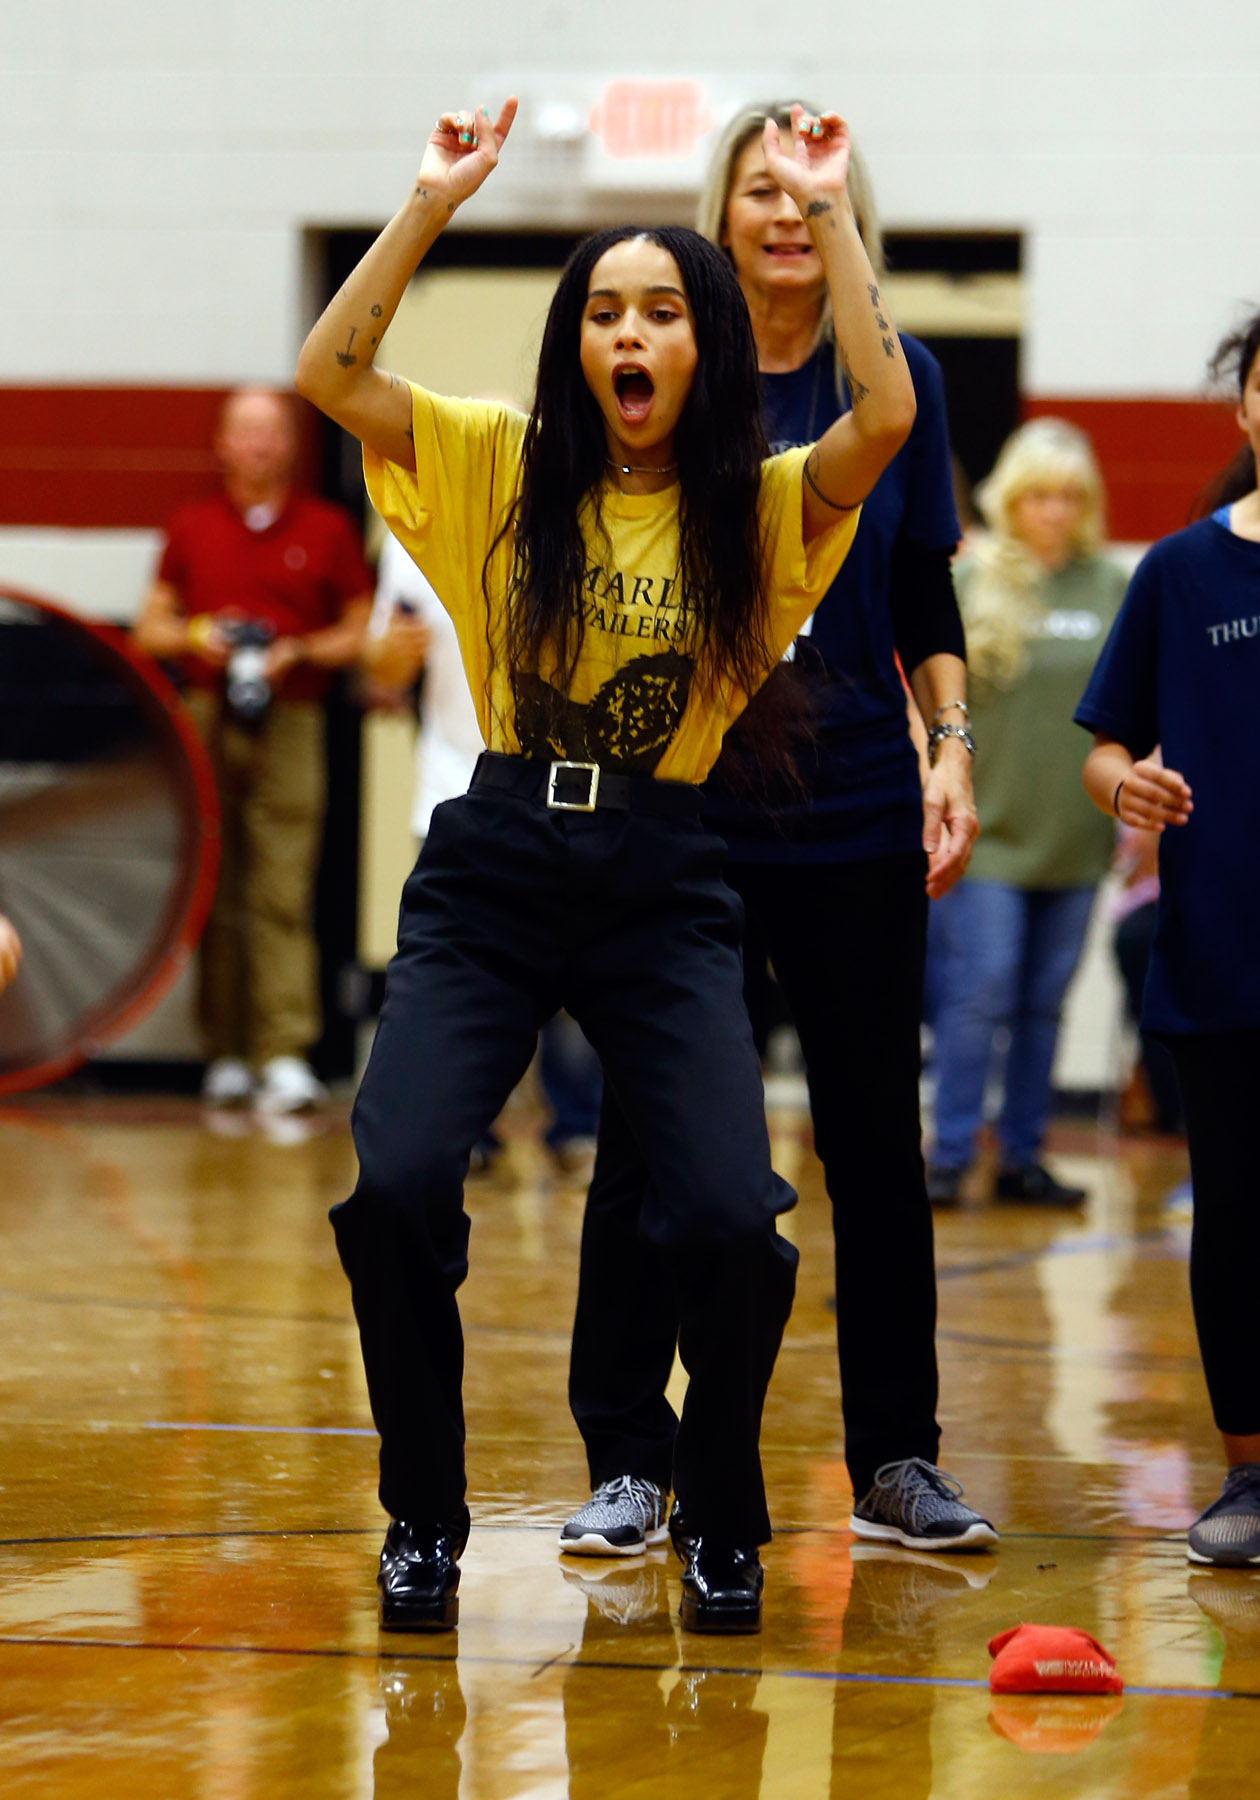 Zoë Kravitz from “Fantastic Beasts: The Crimes of Grindelwald” helps celebrate Wizarding World Day at Parkside Middle School in Baileyton, AL.  (Photo by Butch Dill/Getty Images)